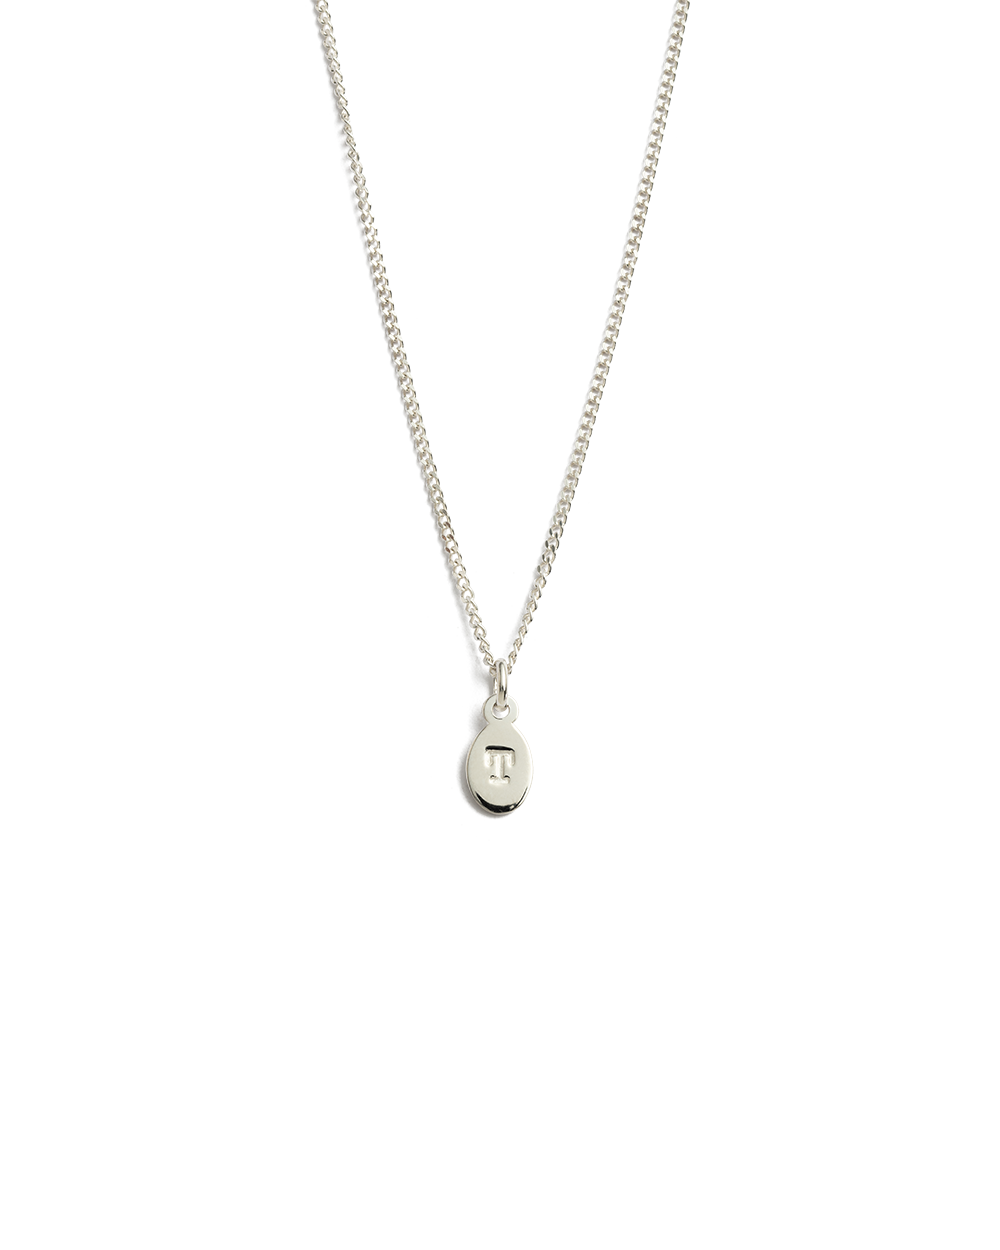 INITIAL NECKLACE A-Z (STERLING SILVER)